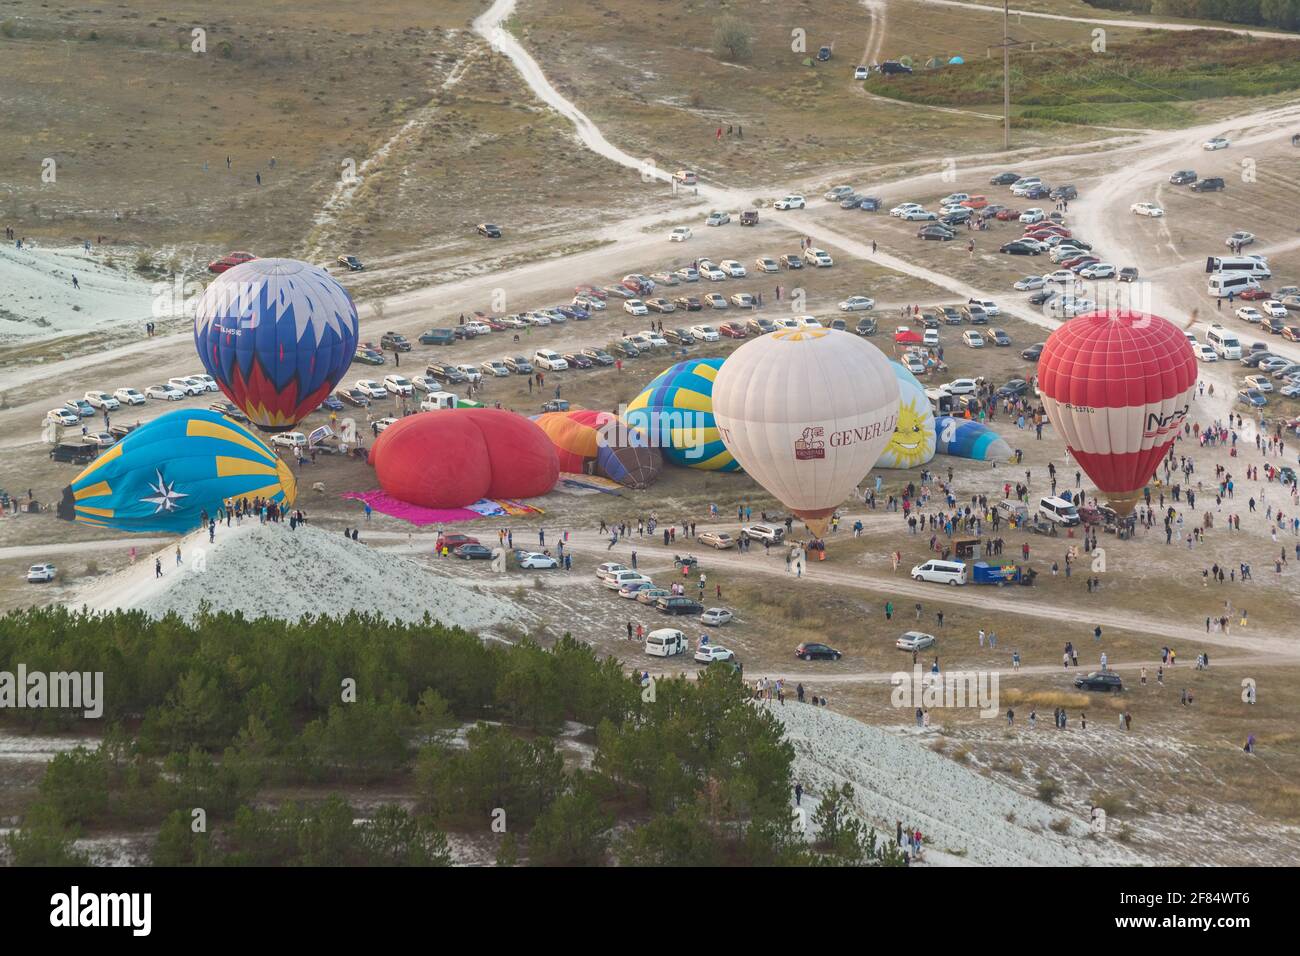 Russia, Crimea, Belogorsk September 19, 2020-Preparation for the launch of many different balloons at the ballooning festival at the foot of the White Stock Photo